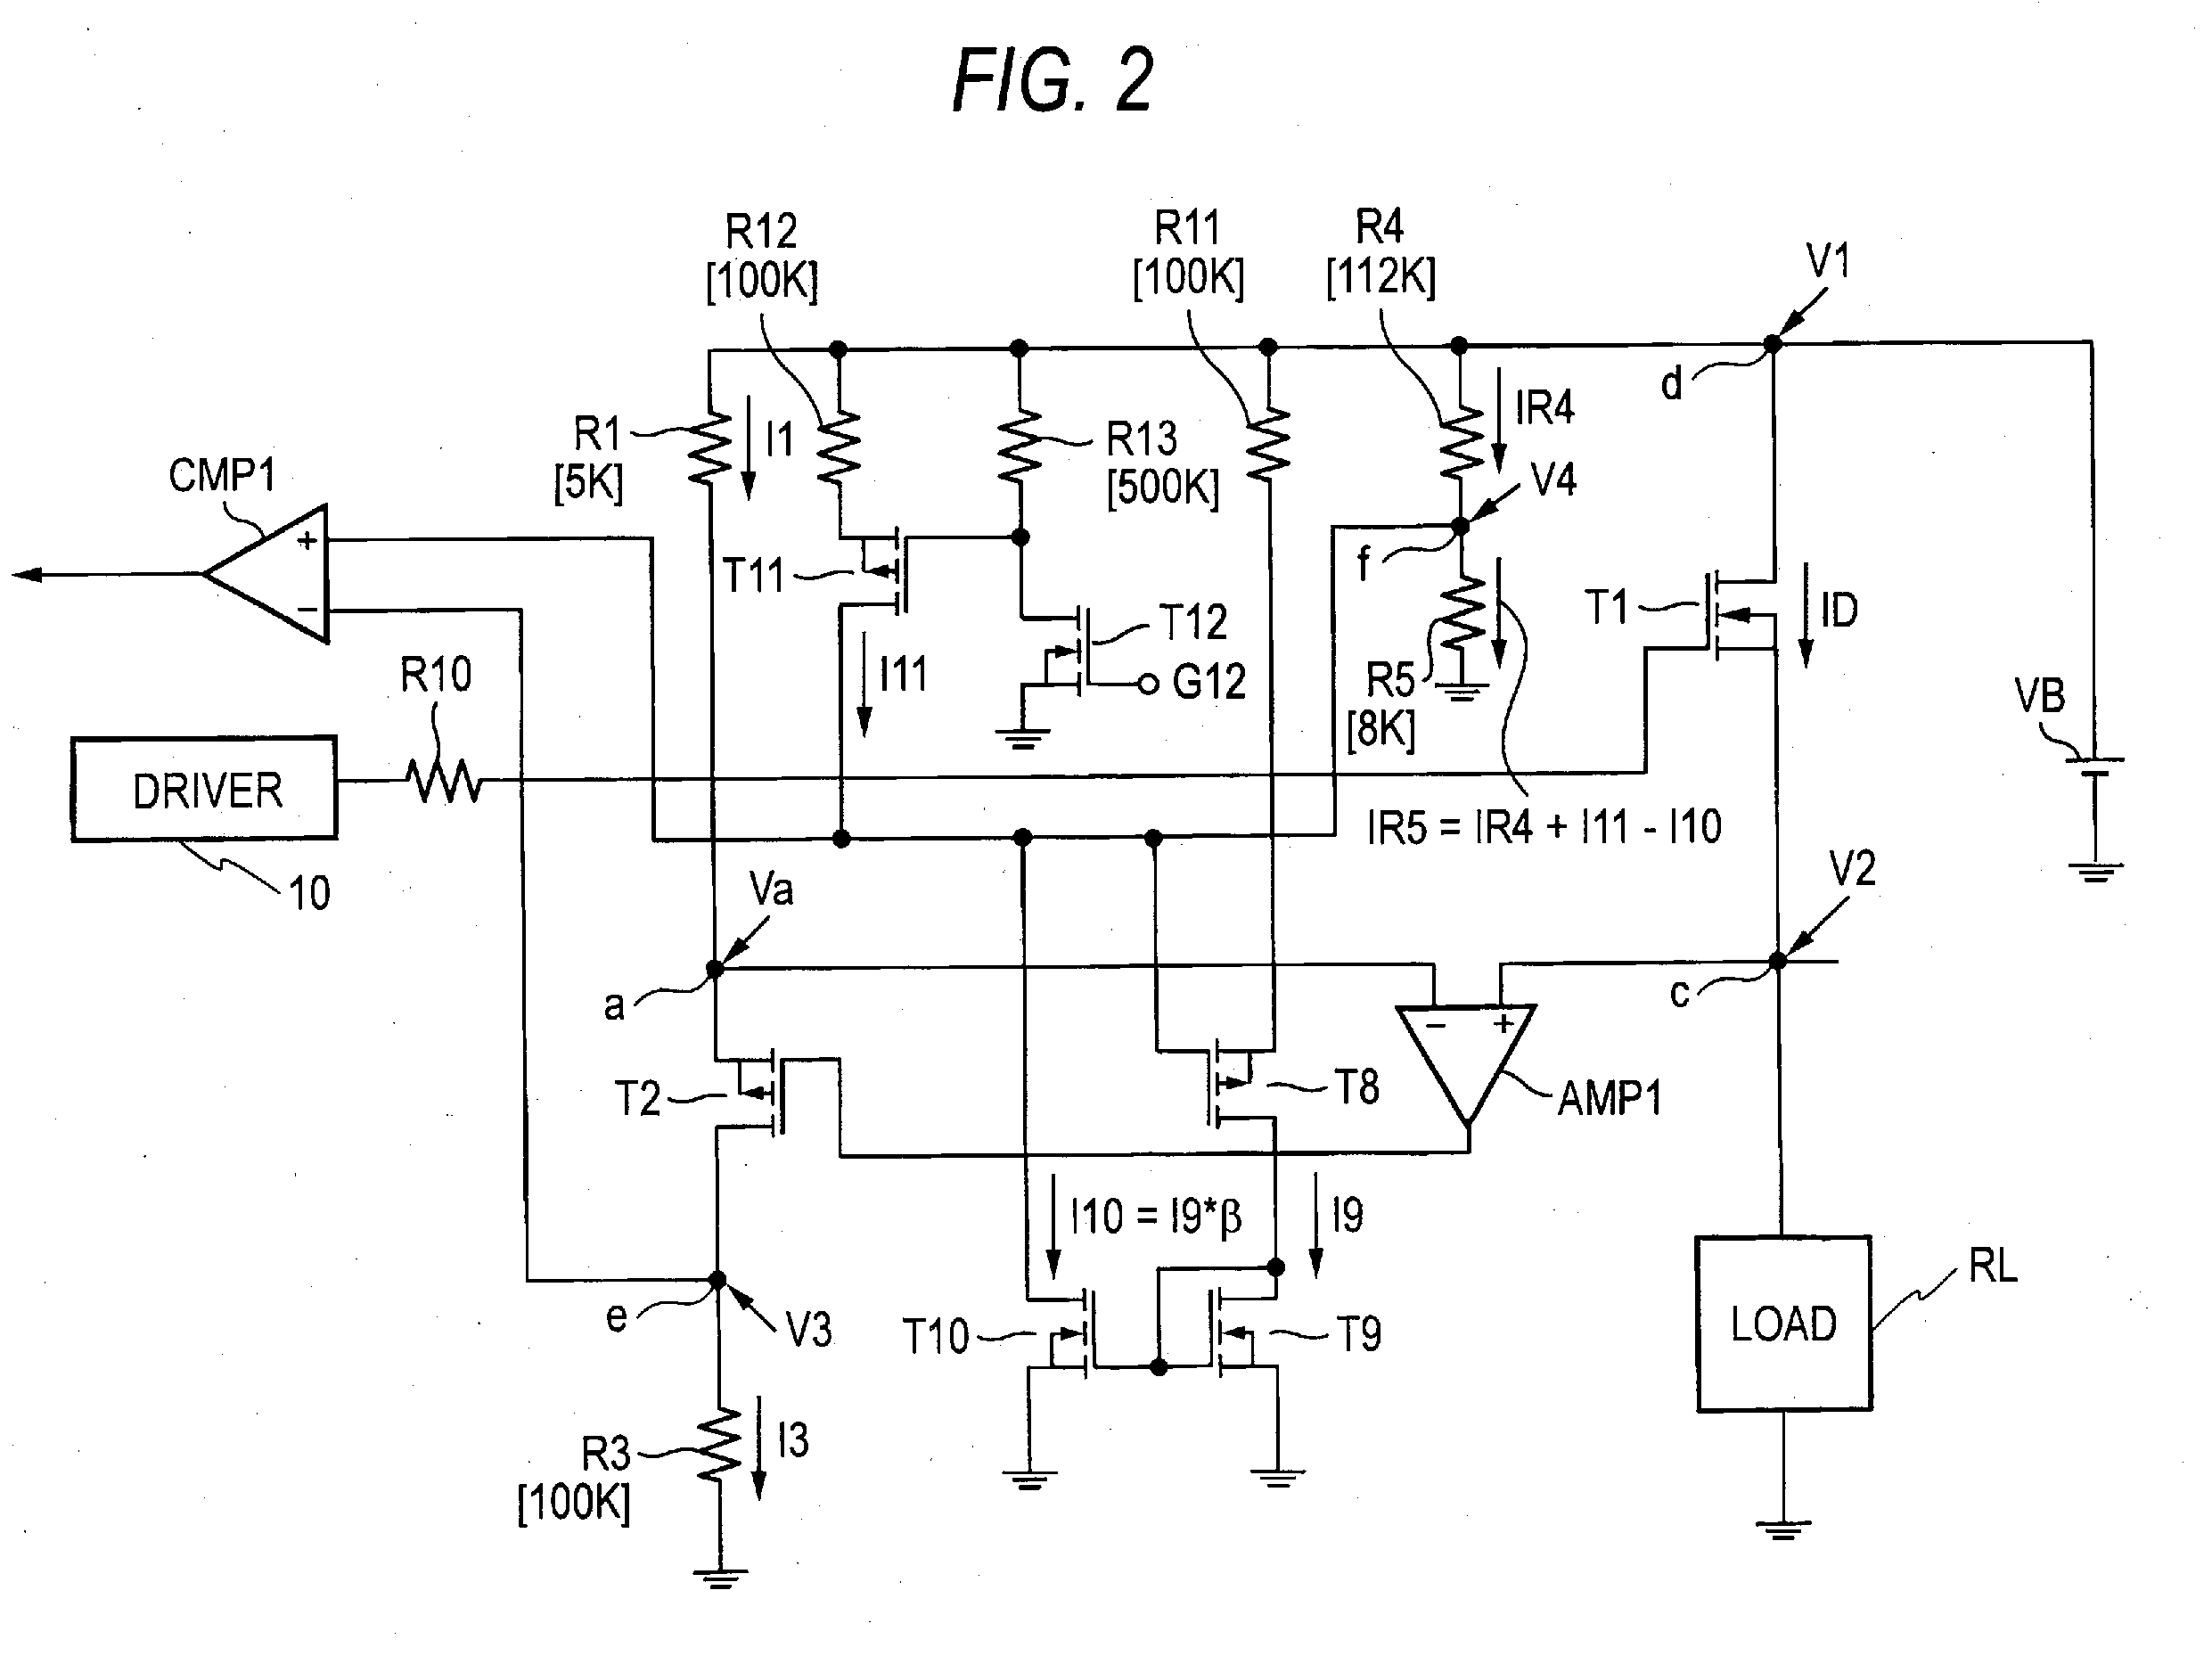 Overcurrent protection apparatus for load circuit